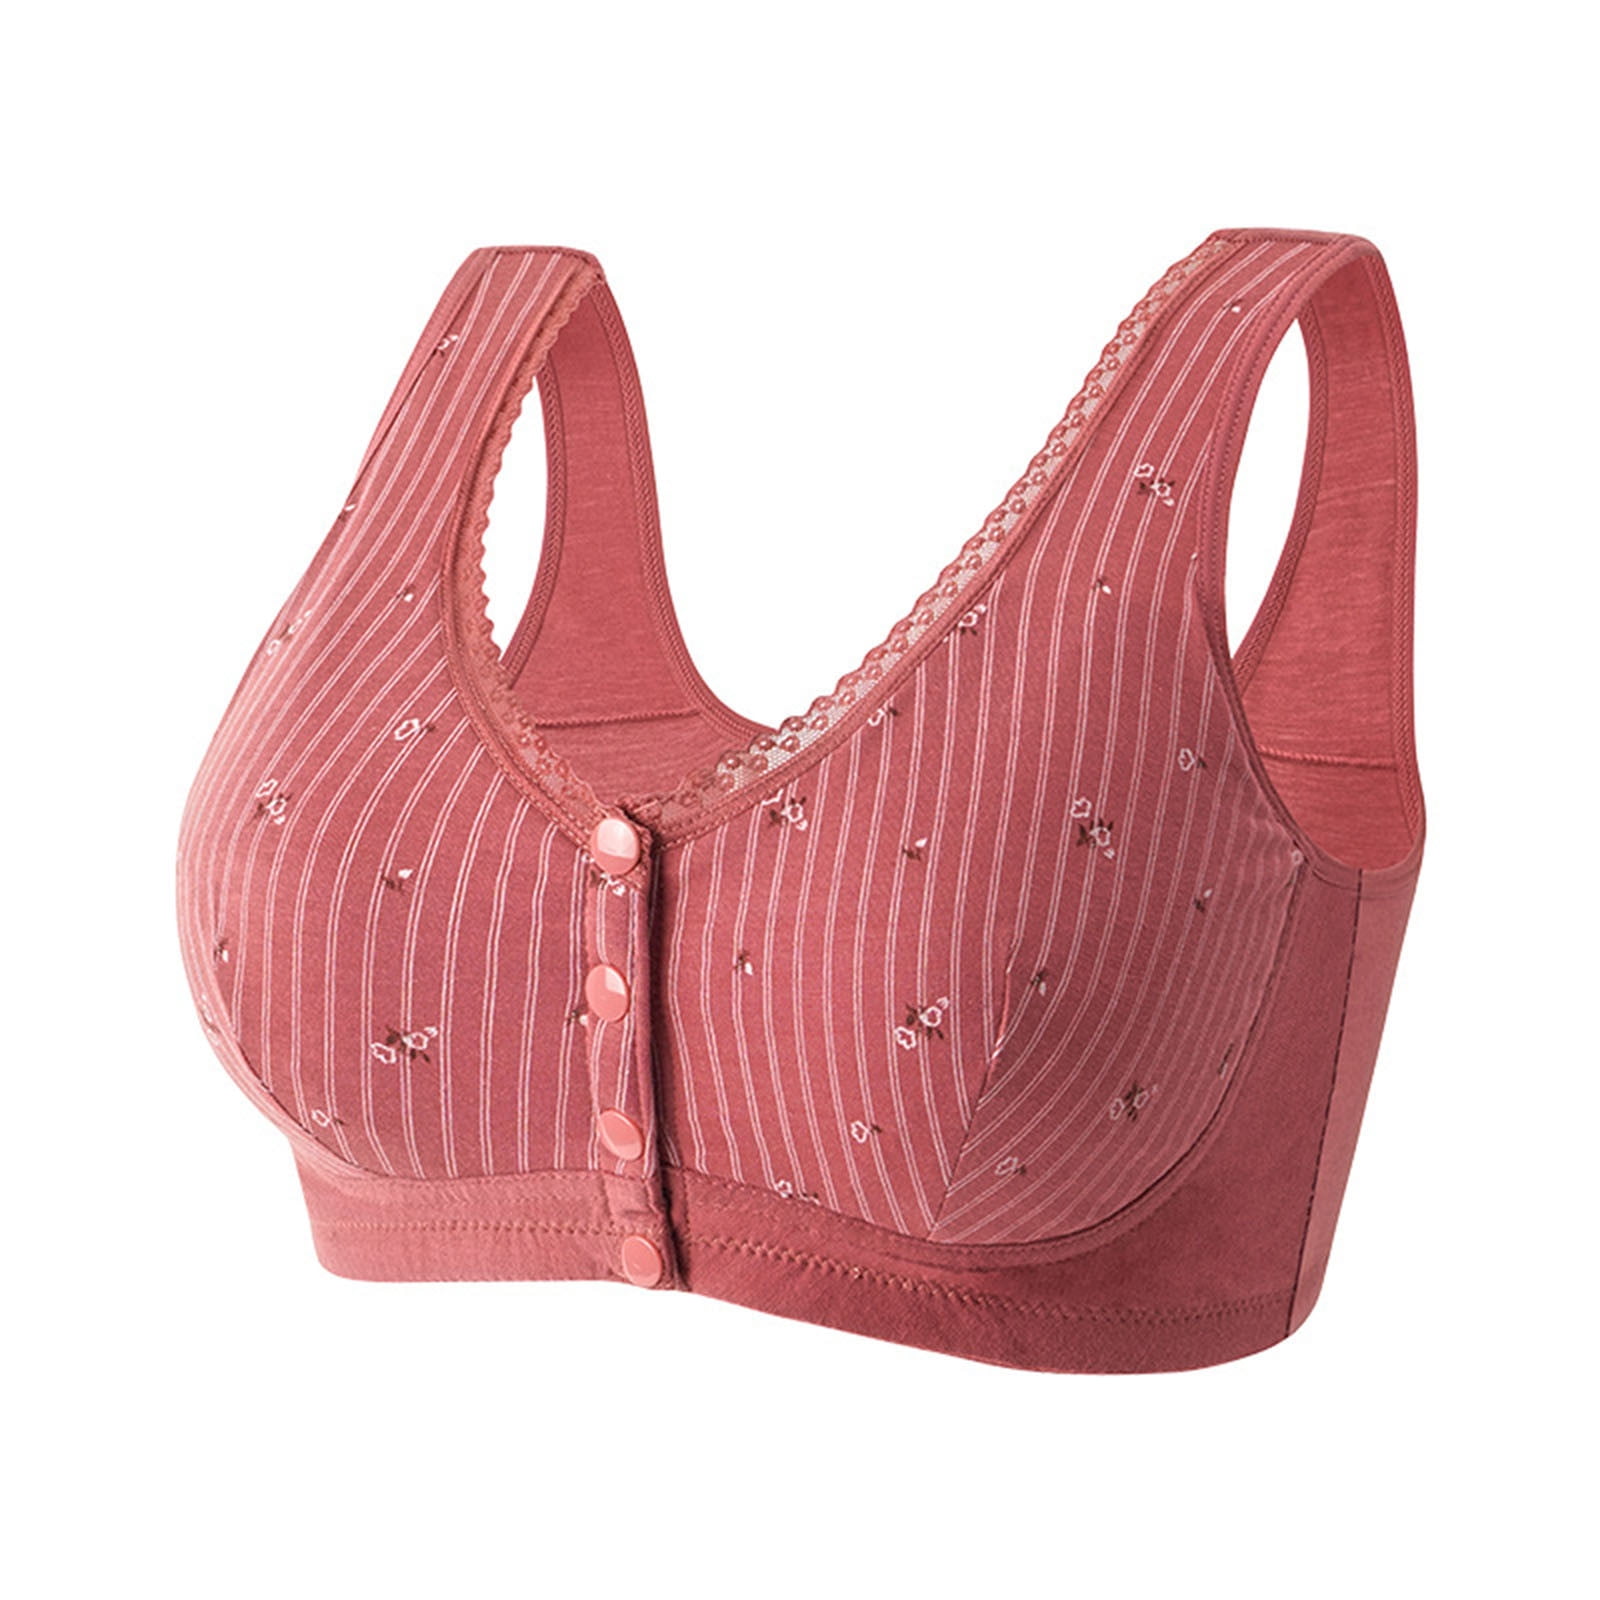 Cotton Front Closure Support Bras for Women Full Coverage and Lift Womens  Bras Front Closure Racer Back Thin Ice Lightweight Sports Bras for Women  and Shaping Powerful Lifting Bra Sale Clearance at